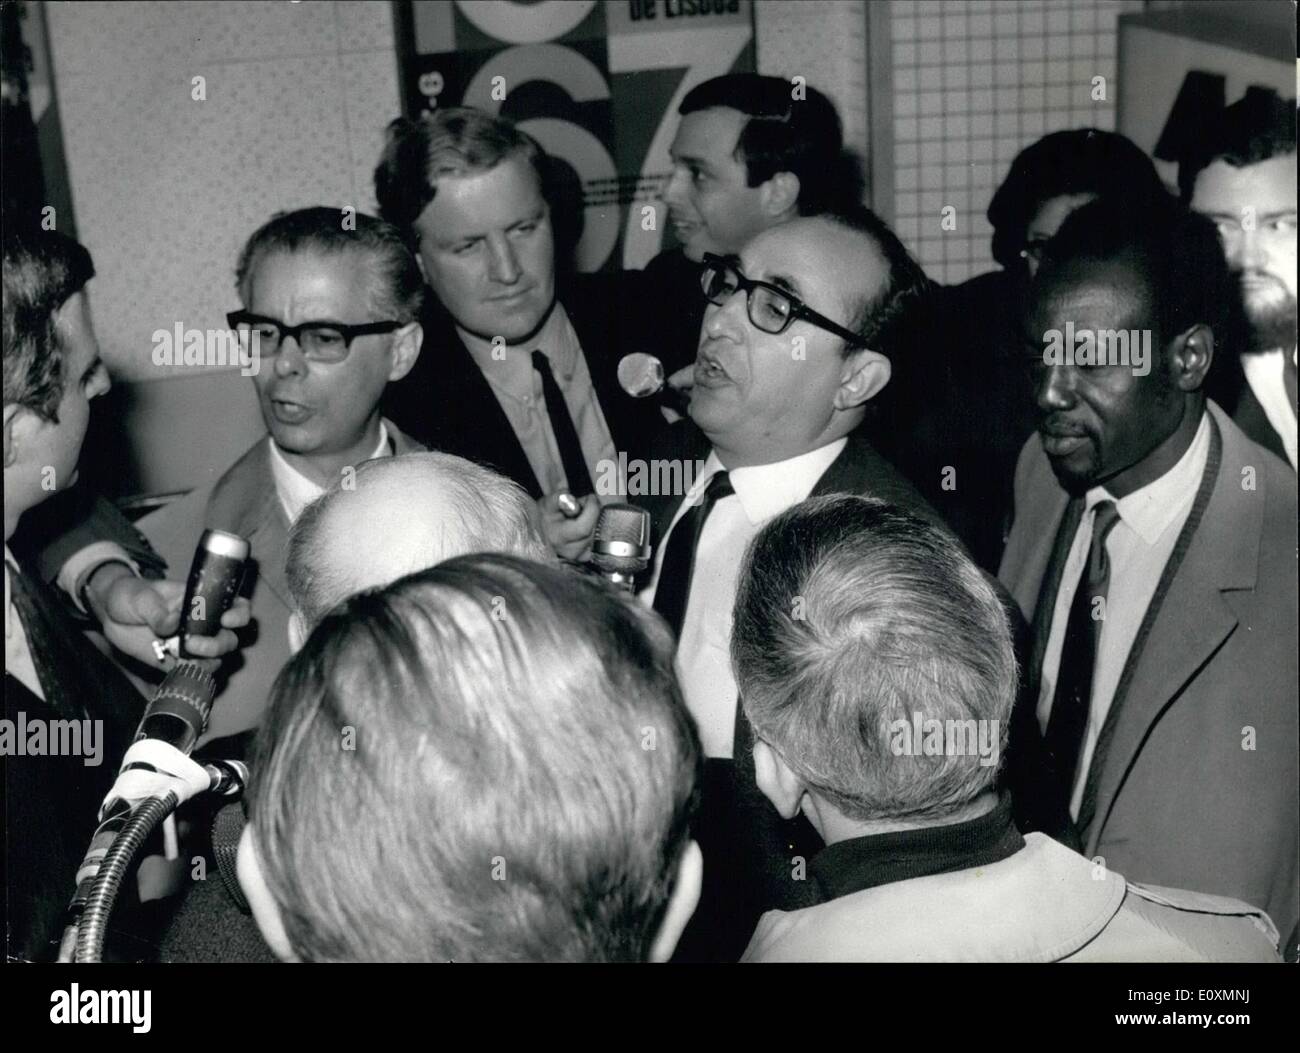 Apr. 04, 1967 - The UNO commission for Aden arrived at Geneva: The UNO commission which left Aden because of alleged non-cooperation from the British has arrived at Geneva, where they will make up their report. The UNO Aden-commission arriving at Geneva airport, where journalists were eager to question them. From left to right (both with spectacles) dr. Manuel Guerrero (Venezuela, head of the commission), Abdul Shalizi (Afghanistan) and Mussa Keita (Rep. of Mali) Stock Photo